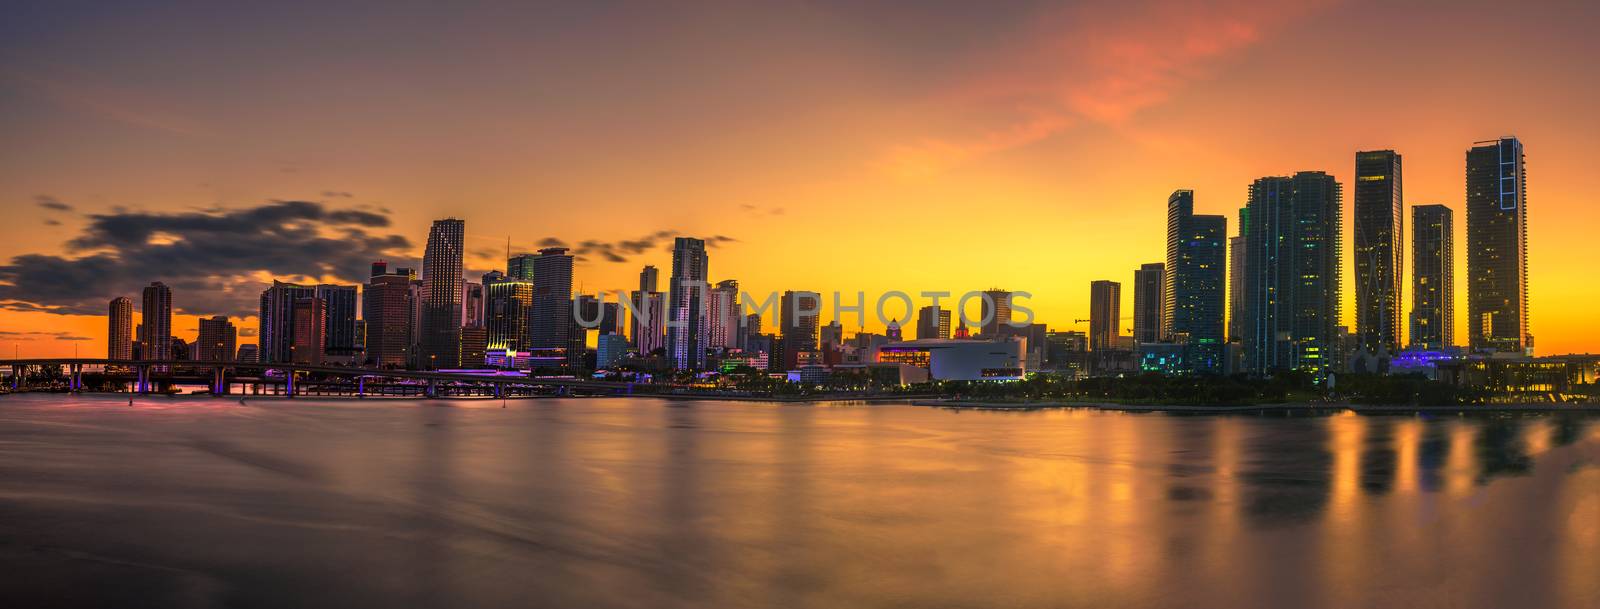 Sunset above Downtown Miami Skyline and Biscayne Bay by nickfox